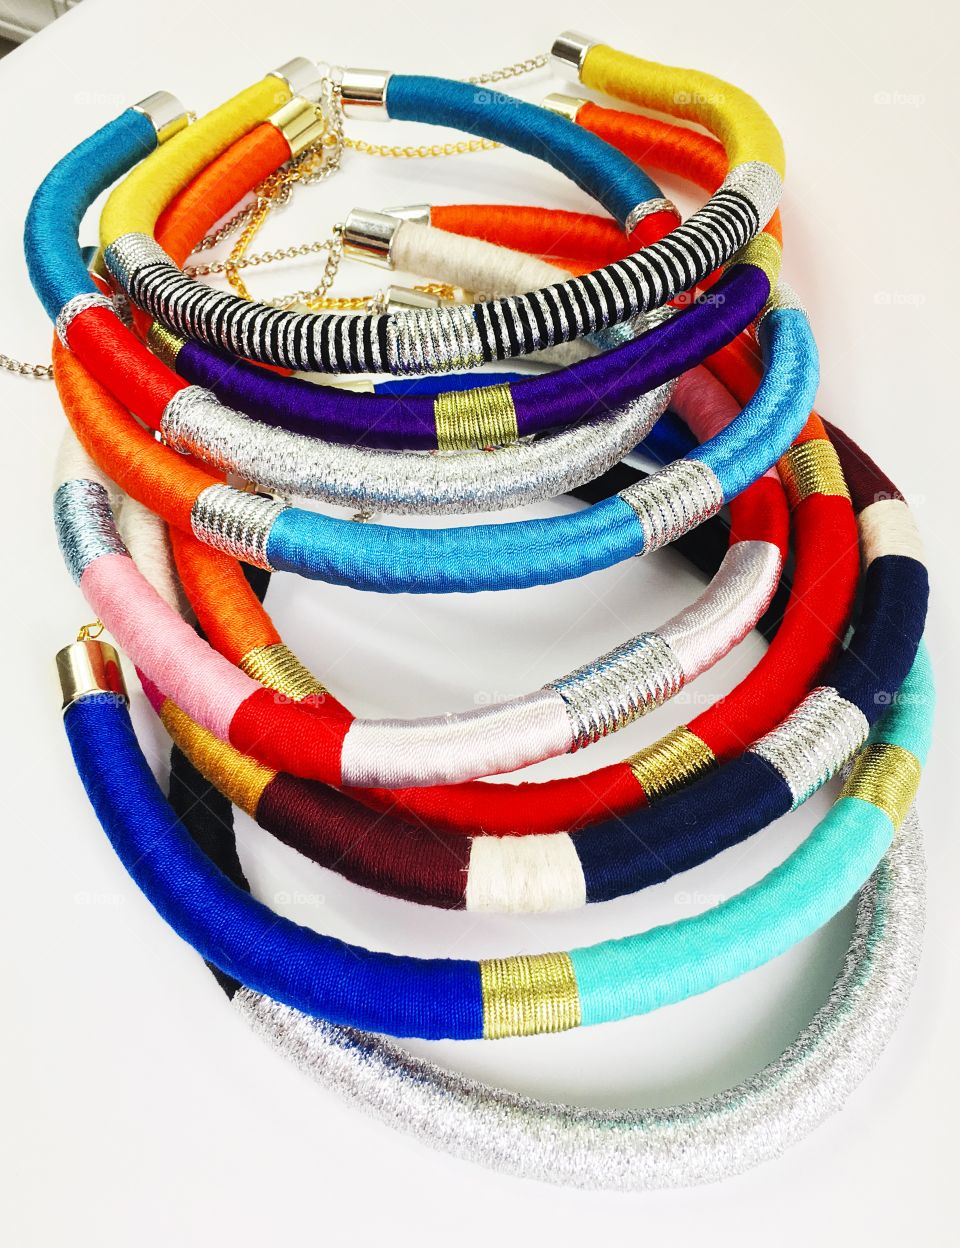 Colorful handmade rope necklaces with a minimalist style